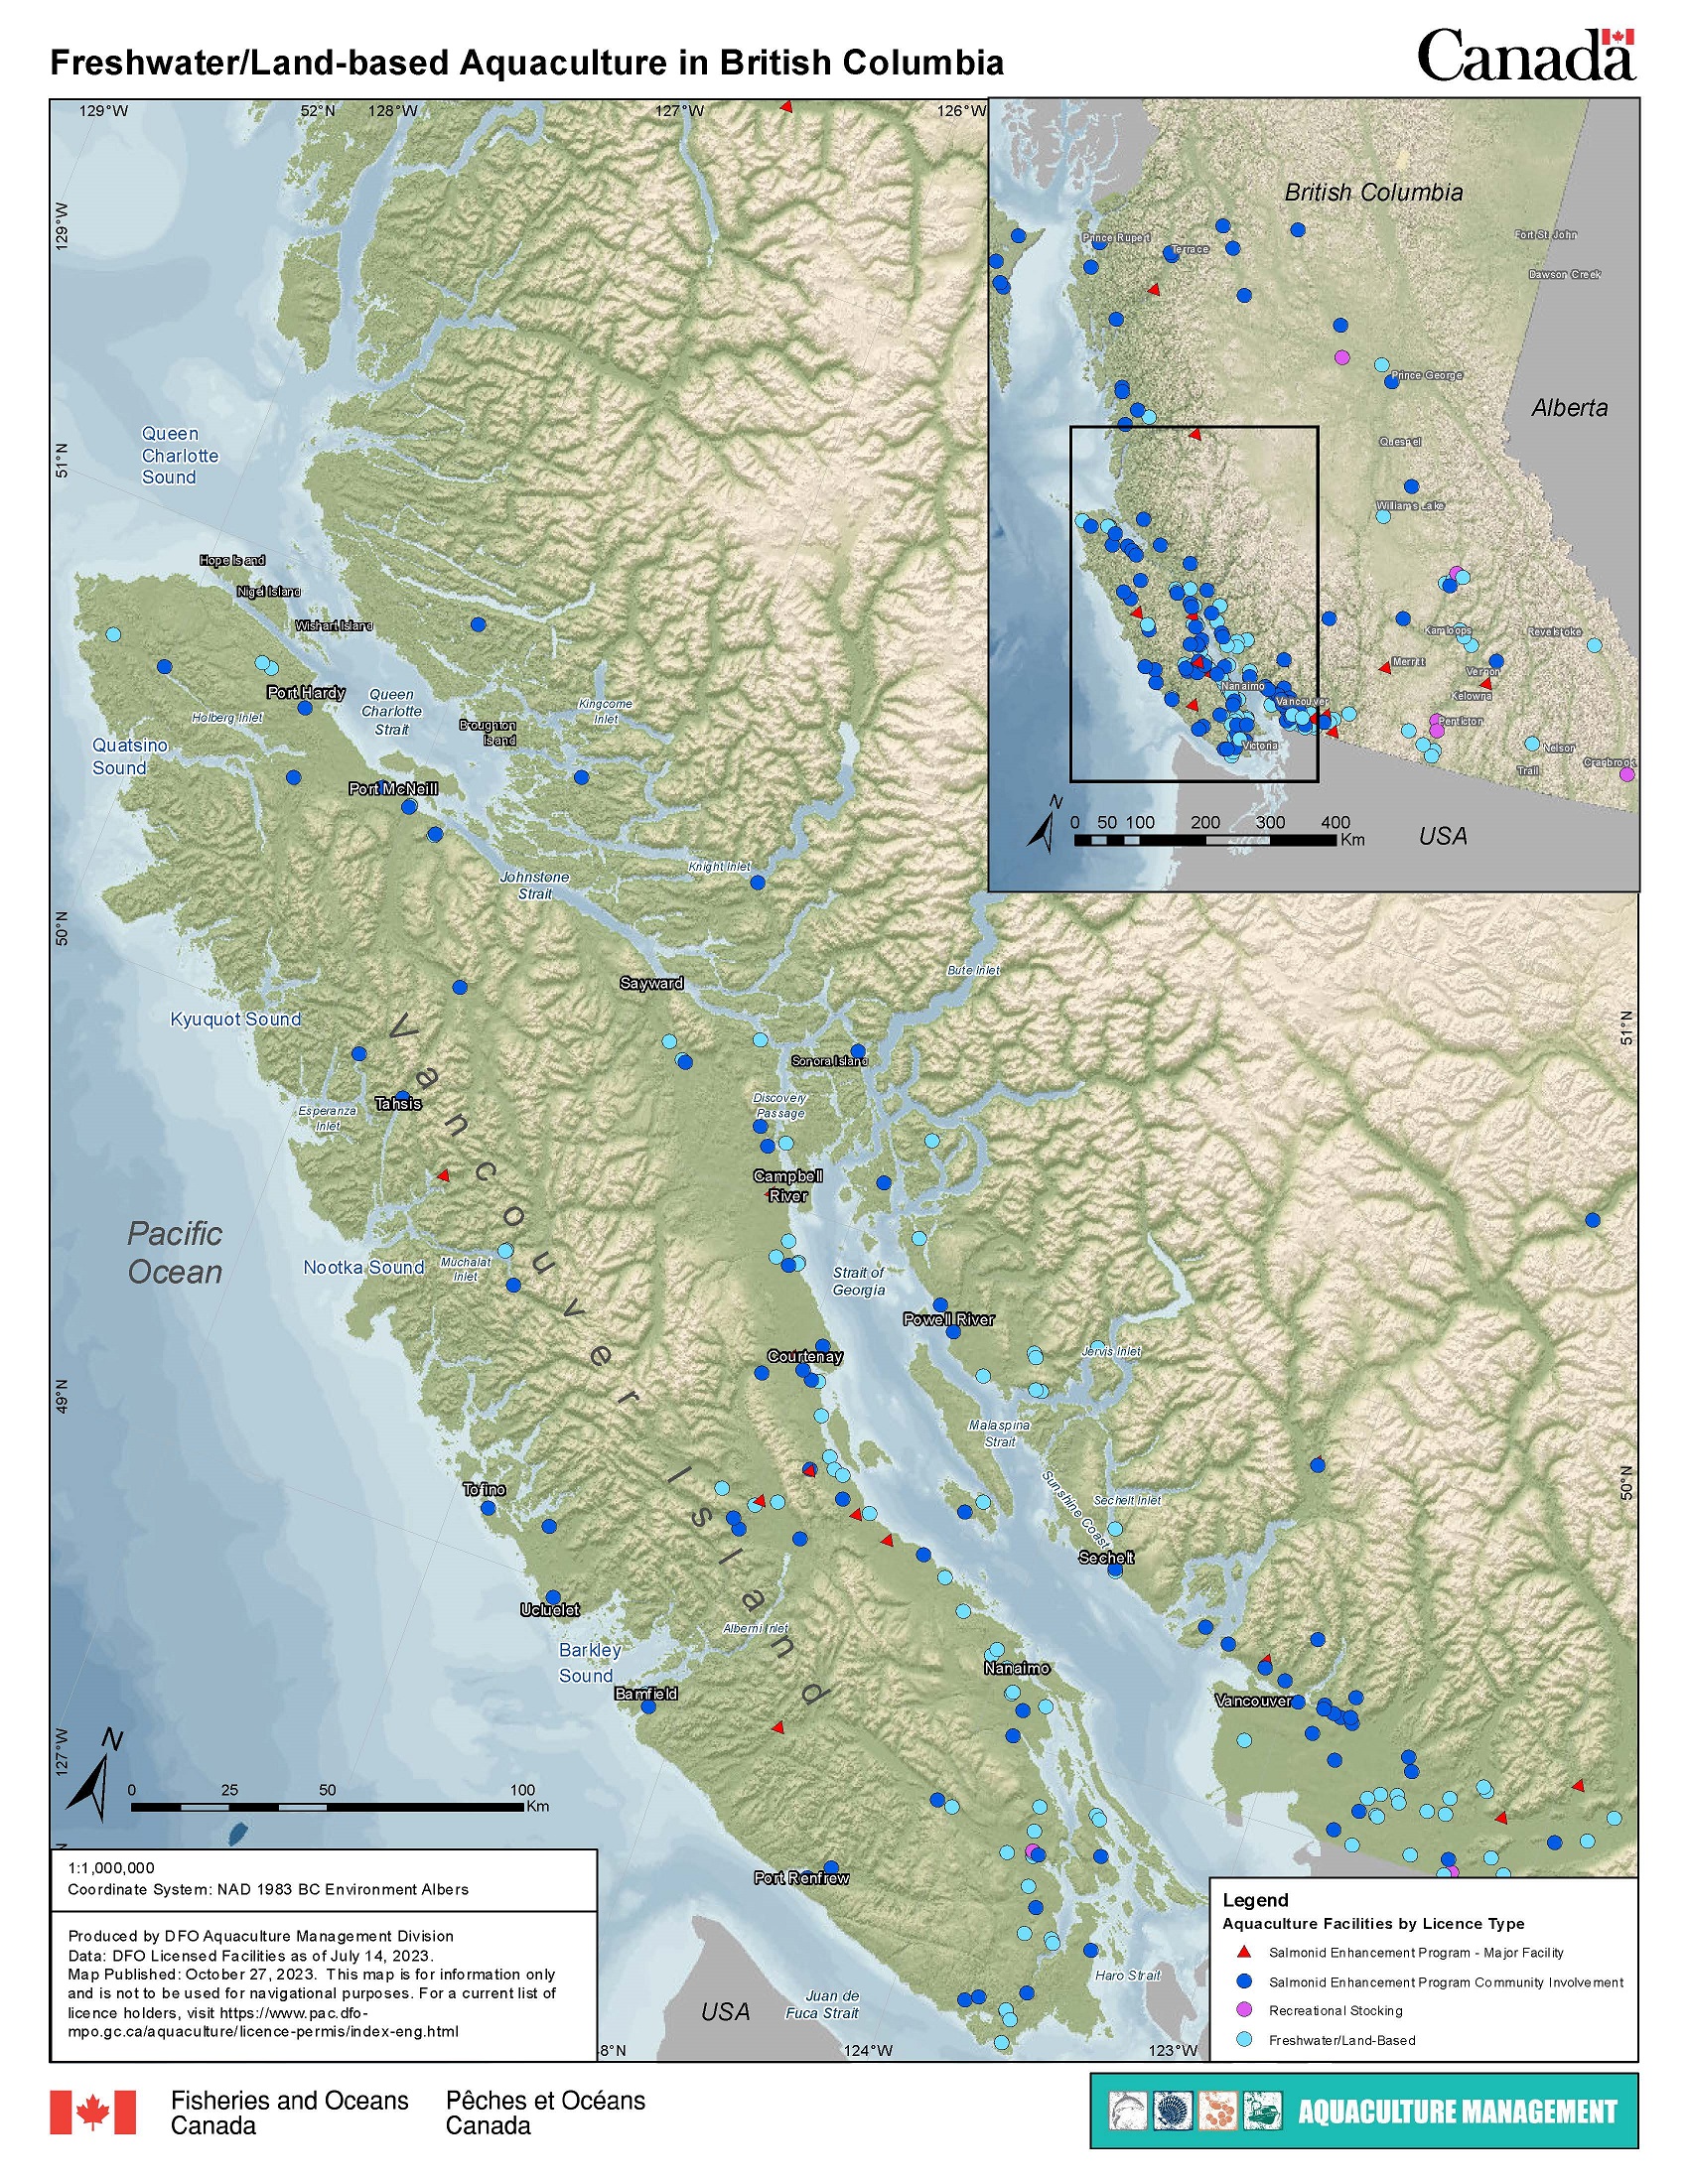 Map of 2020 Freshwater/Land-based Aquaculture in BC